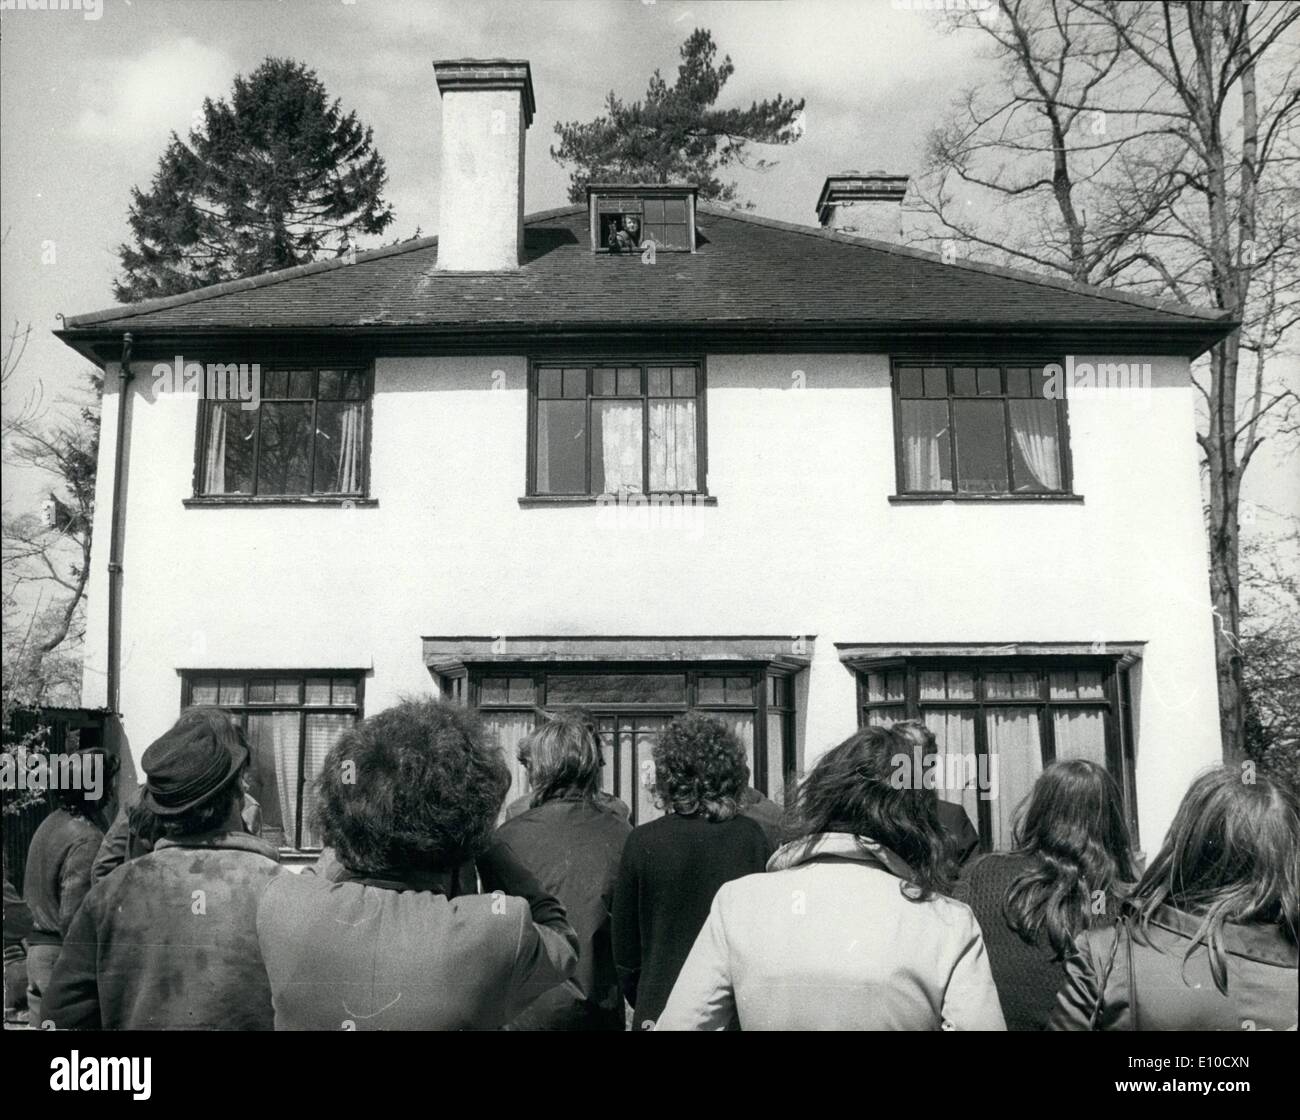 Apr. 04, 1972 - Women Barricade themselves in house.: Two women barricade themselves into an attic yesterday as bailiffs moved into their home, which is to be demolished to make way for the A34 Abingdon by-pass. One of the women, Miss Iris Mason,53, threatened to throw herself off the roof. She was protesting about the amount of compensation to ne paid by the Department of the Environment for the house in Hinskey Hill, Oxford, which she occupies with Miss Kathleen Flower, 88. The two women left the attic five hours later, after talking to their solicitor Stock Photo